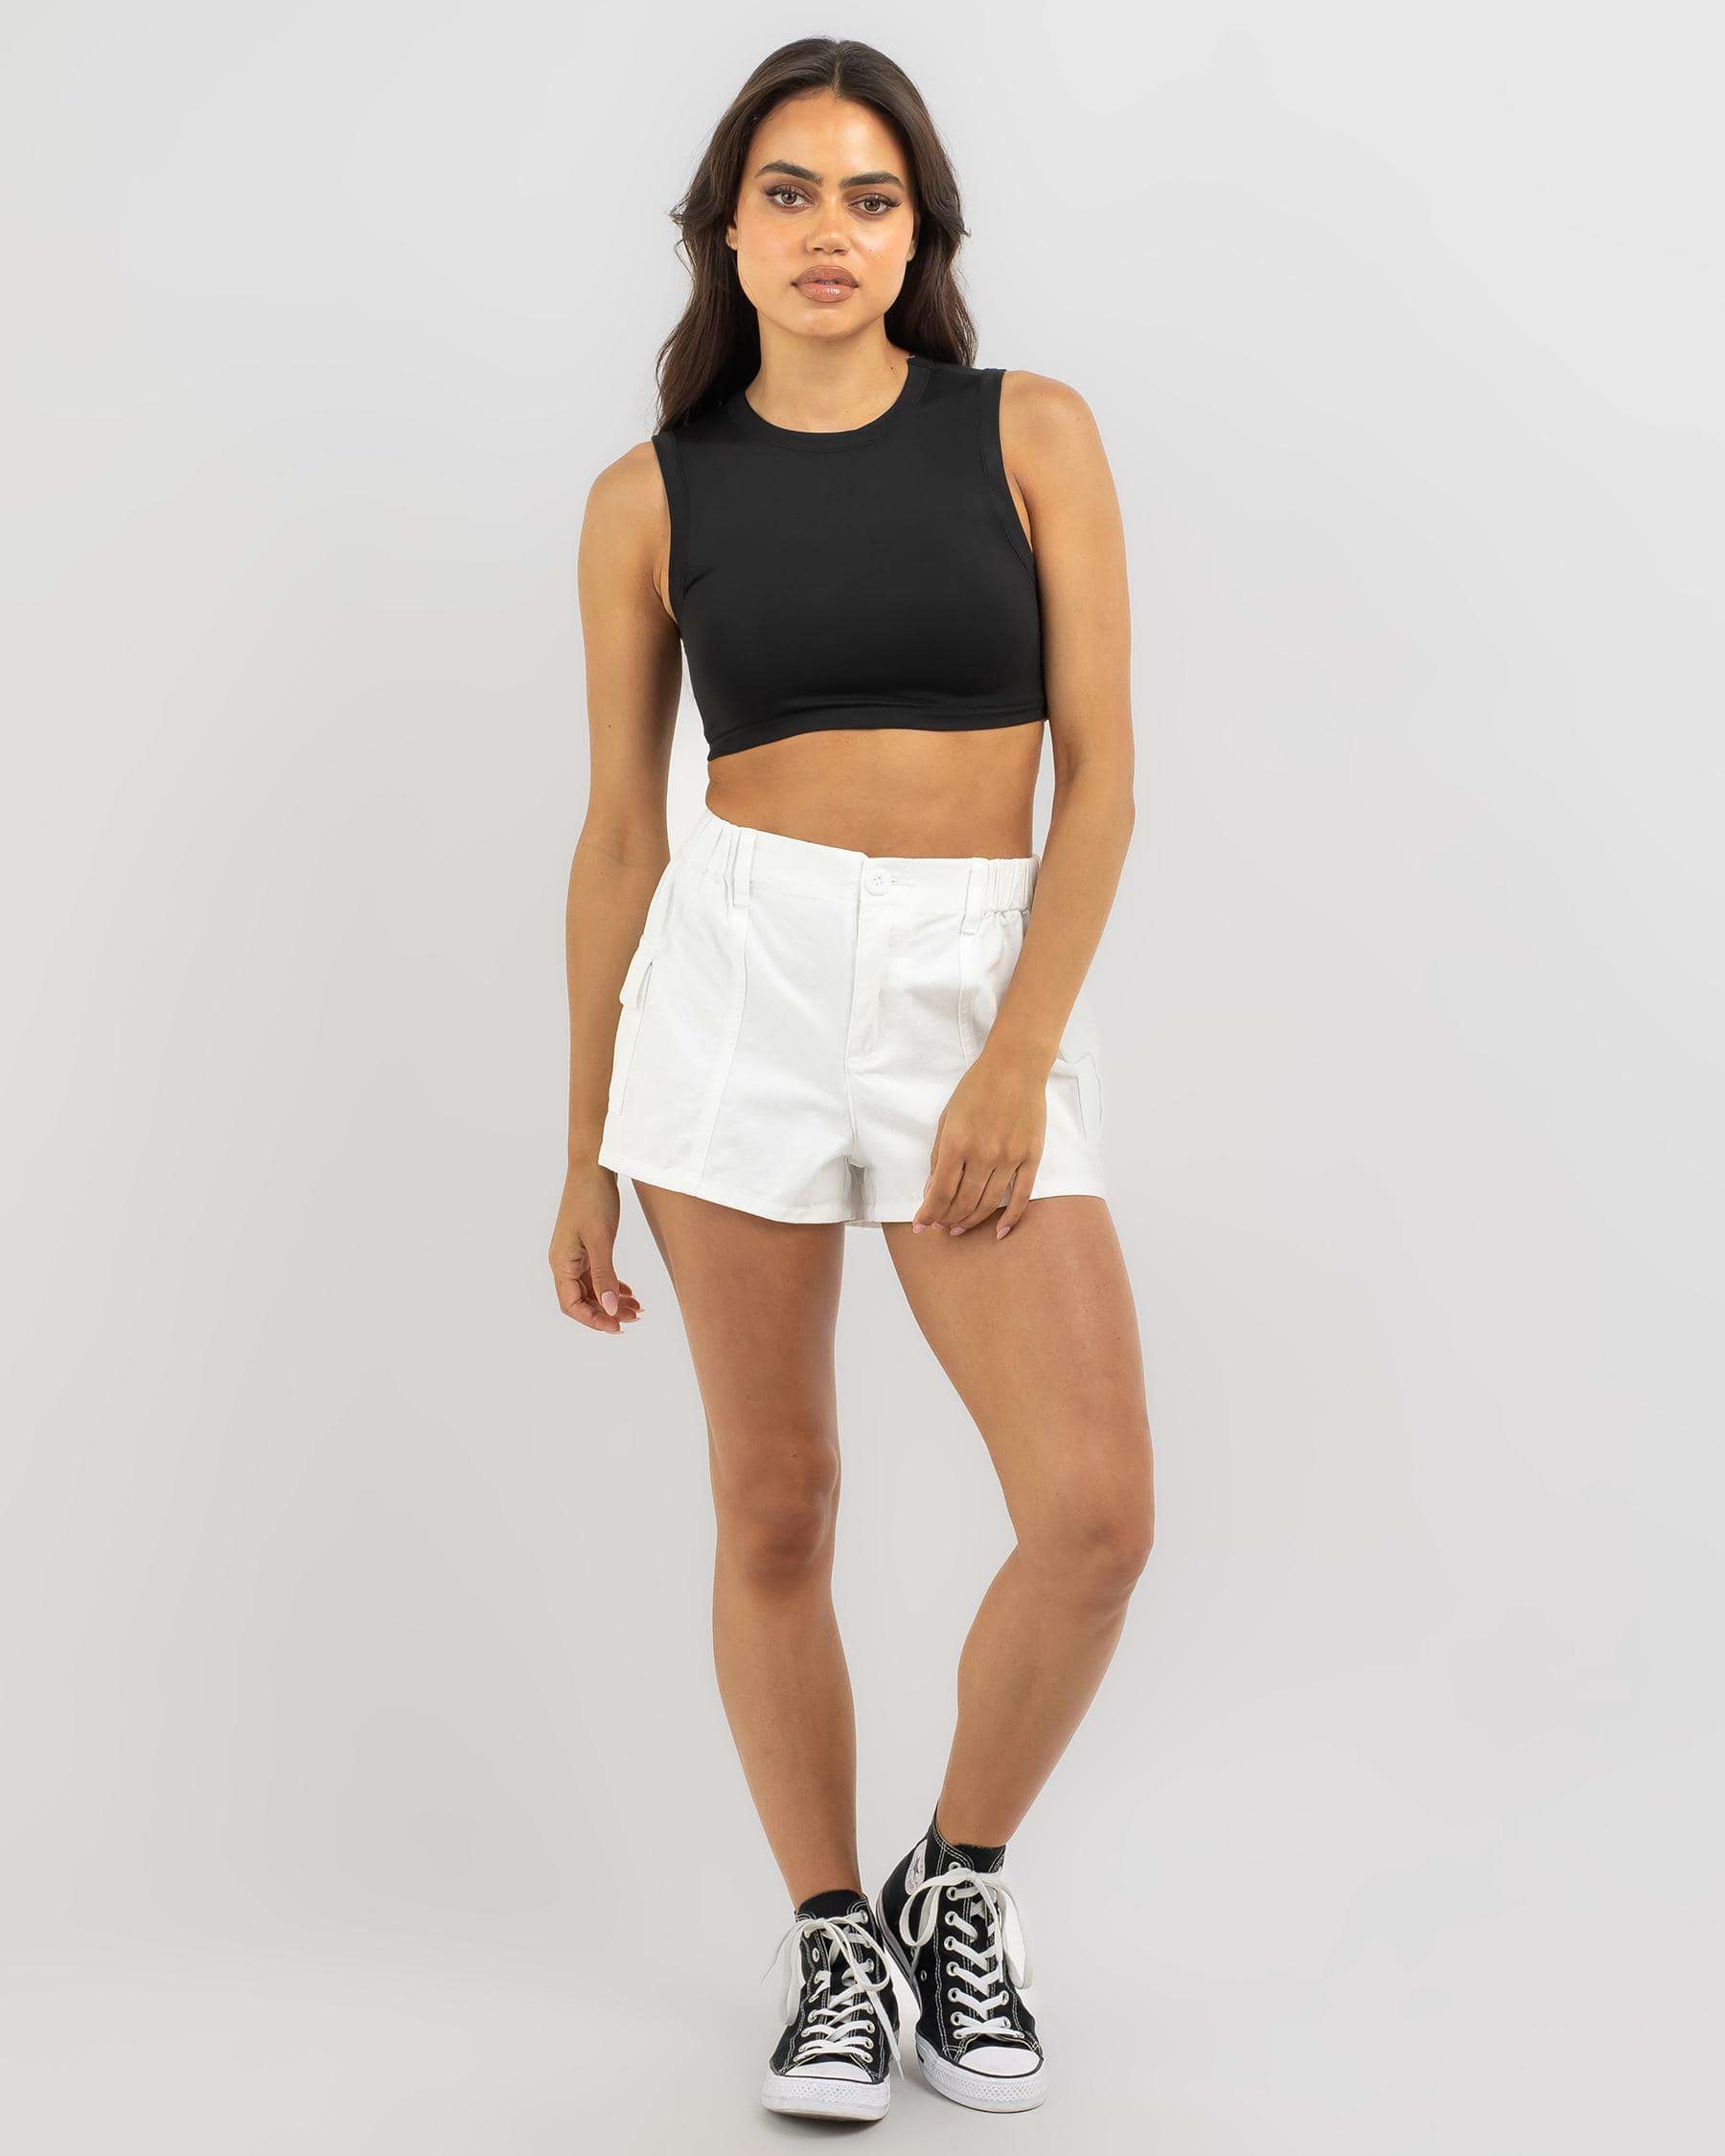 Ava And Ever Chicago High Neck Crop Top In Black - Fast Shipping & Easy ...